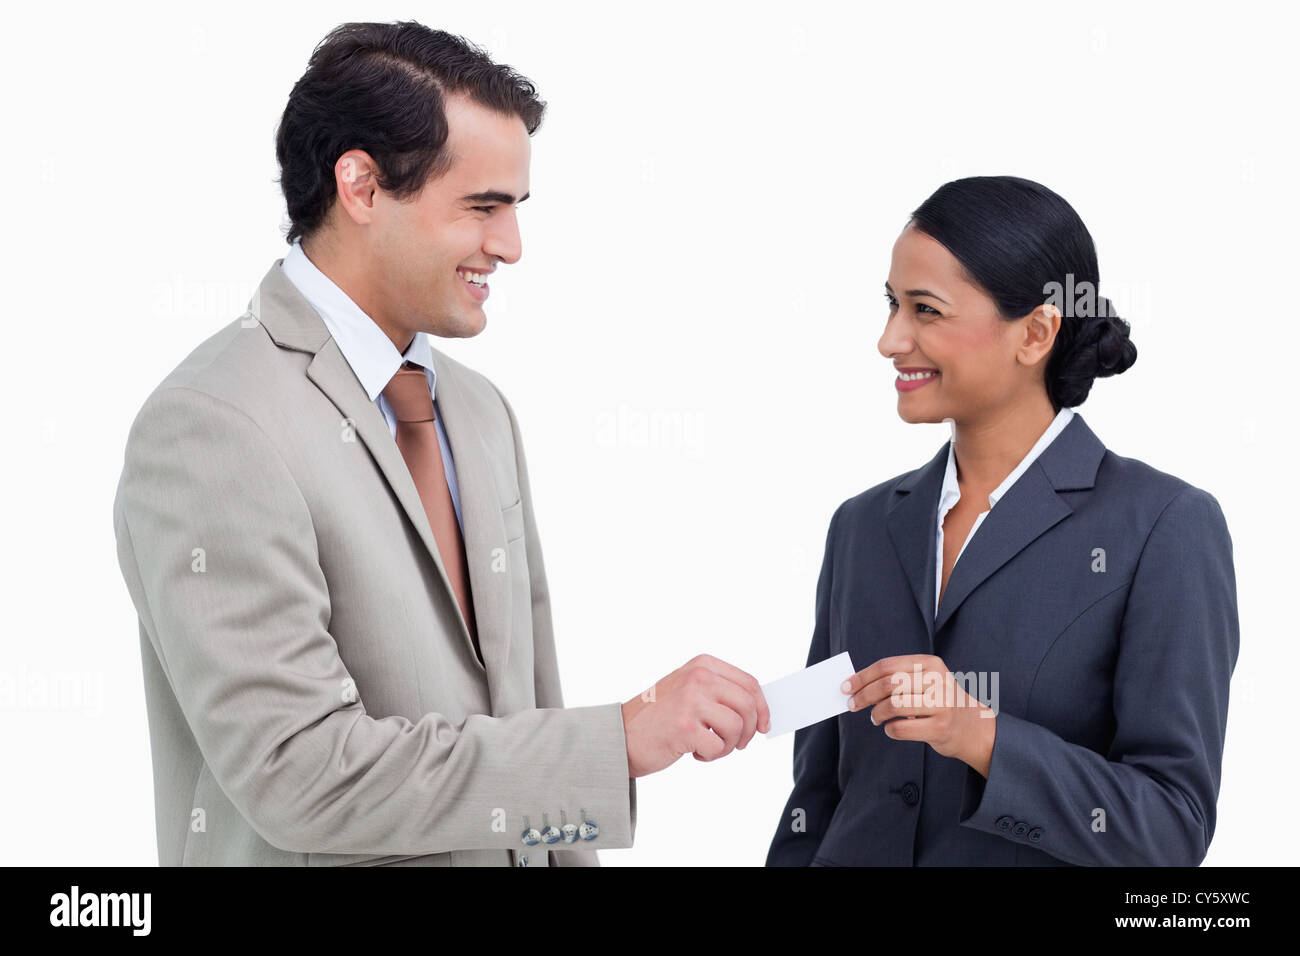 Smiling business people exchanging business cards Stock Photo